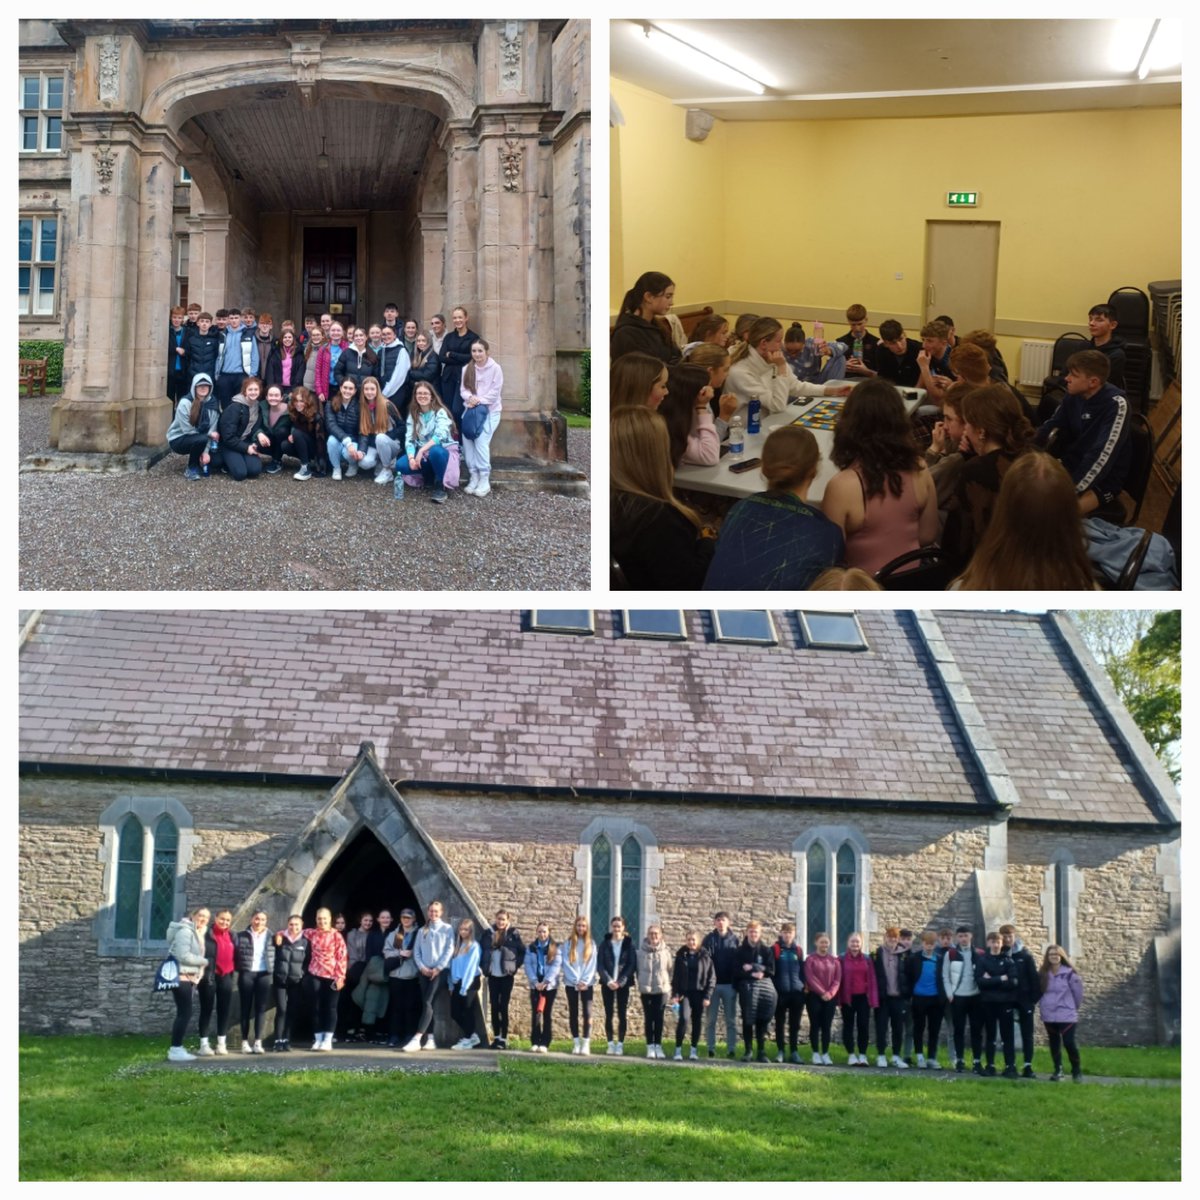 Gaisce 23-24 started with a lovely 15km walk last Thursday evening followed by a break for dinner & some 'ghost hunting' in Muckross Abbey. Before bed we had some fiercely competitive games of 30 seconds-boys v girls, then TY1 v TY2/3 v teachers. Winner anonymous!!